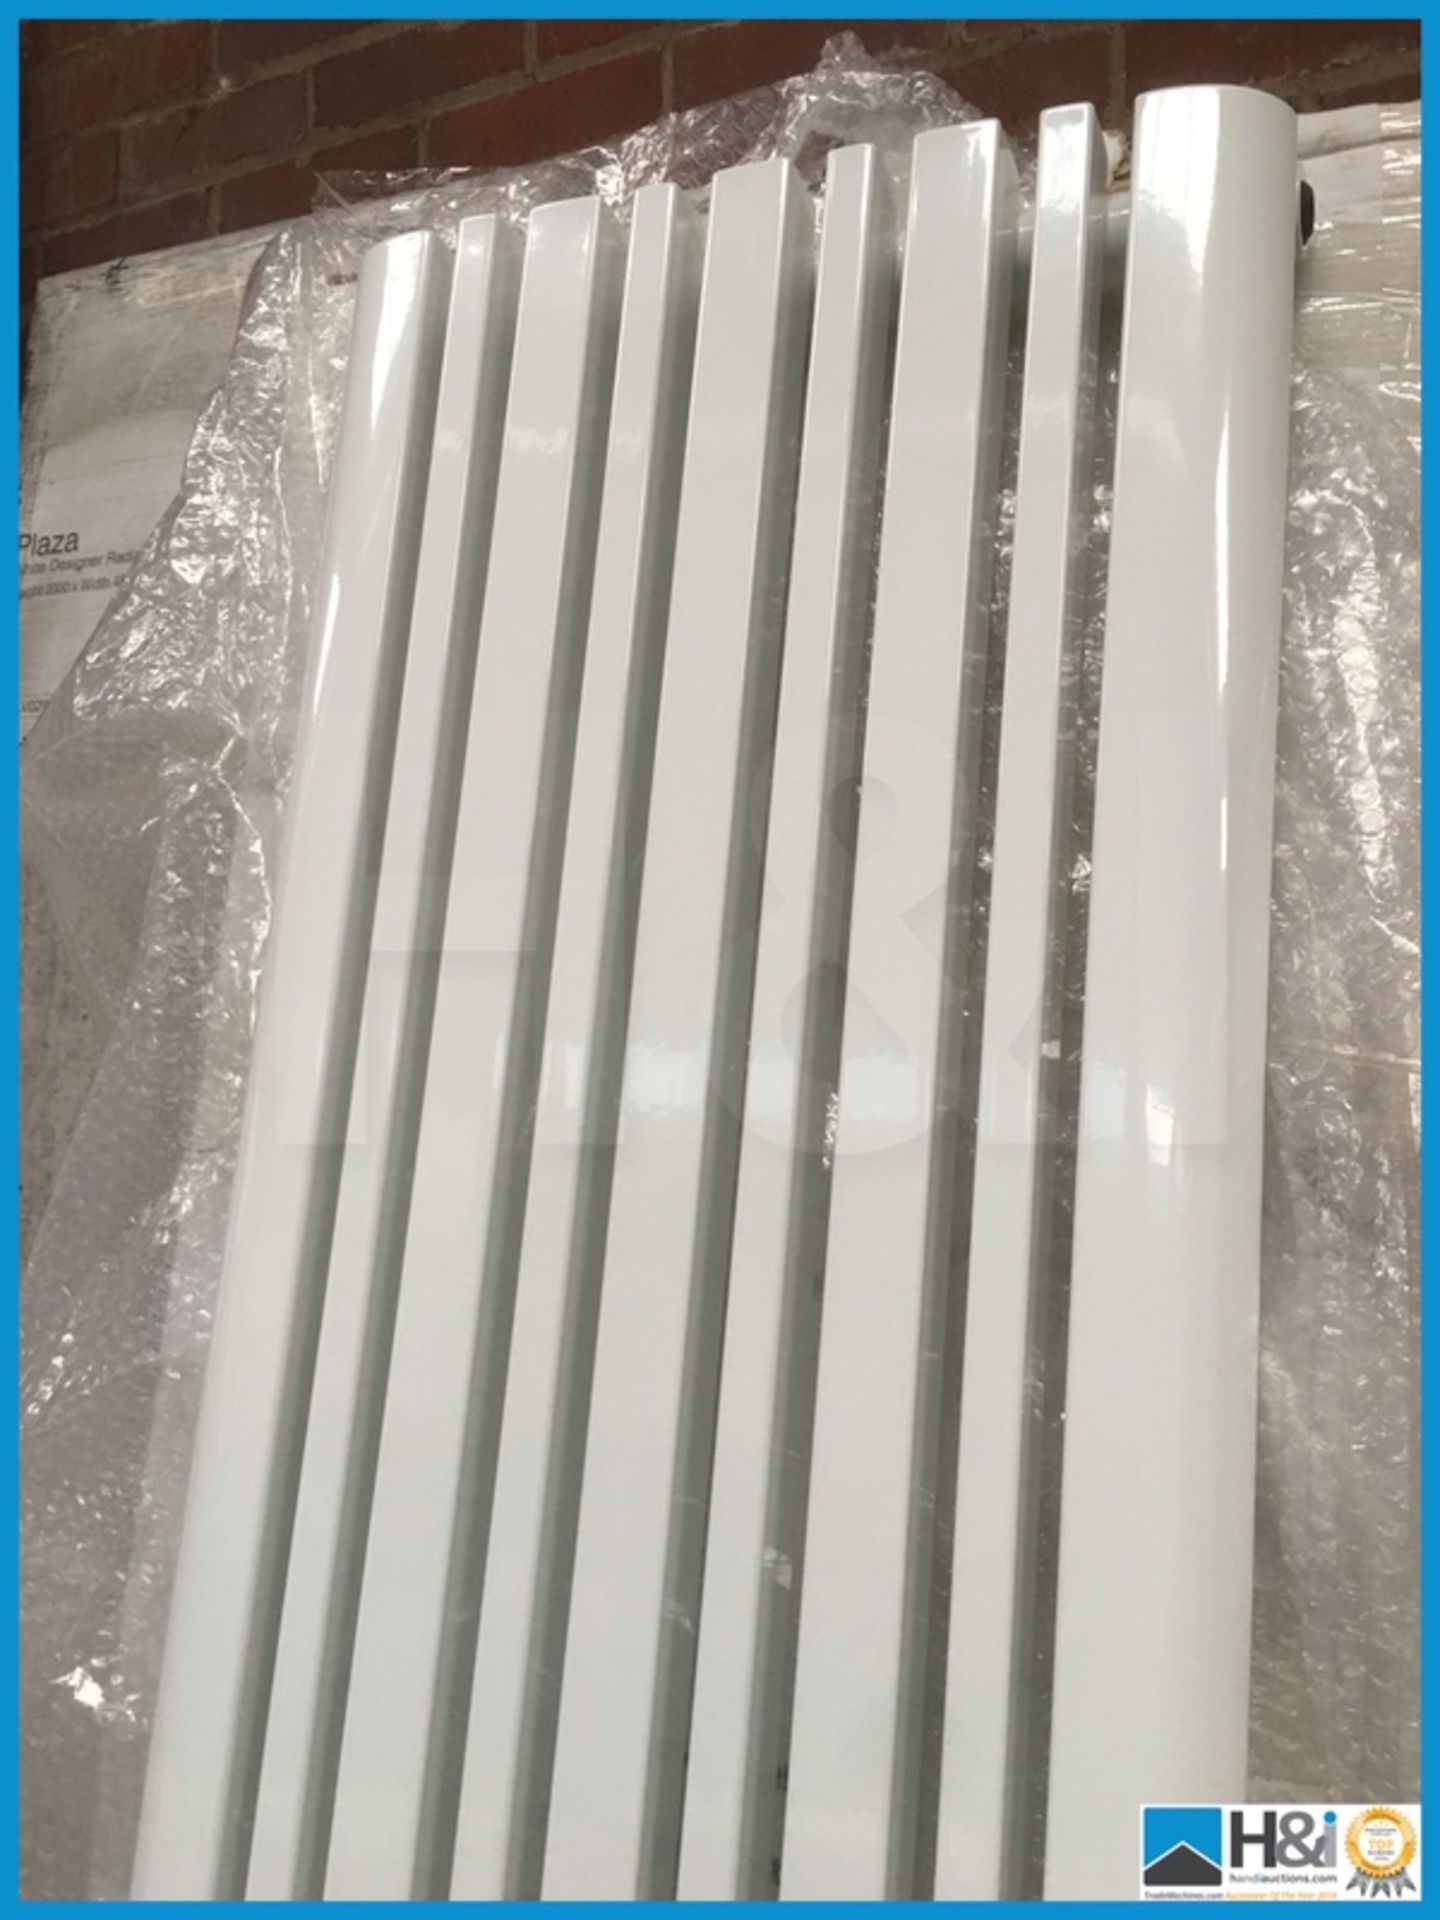 Stunning designer Phoenix Tower radiator 1800x423 finished in white RA115. New and boxed.